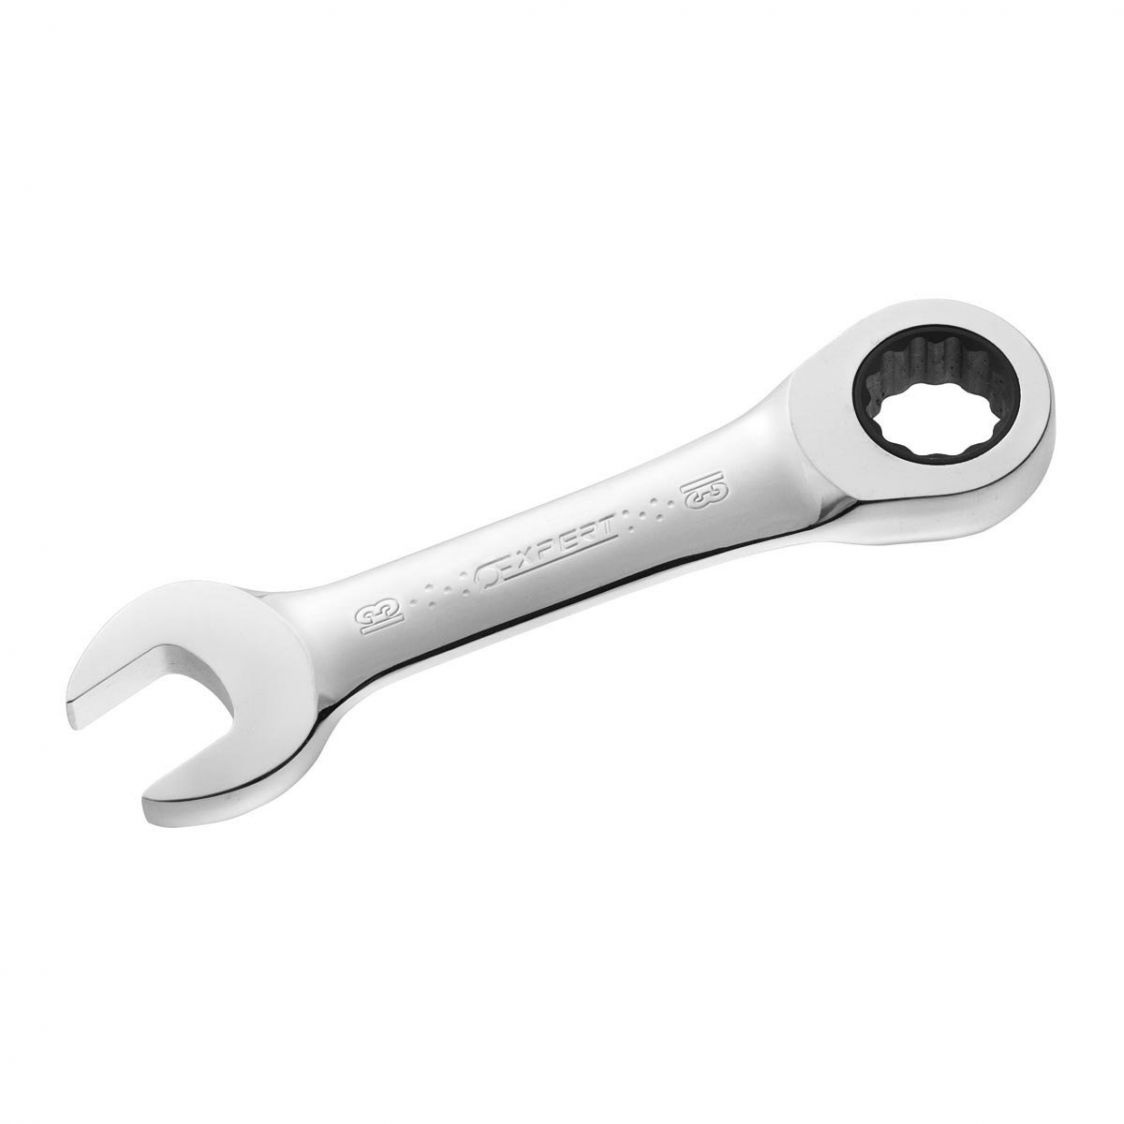 EXPERT by FACOM E110918 - 14mm Metric Stubby Ratchet Combination Spanner